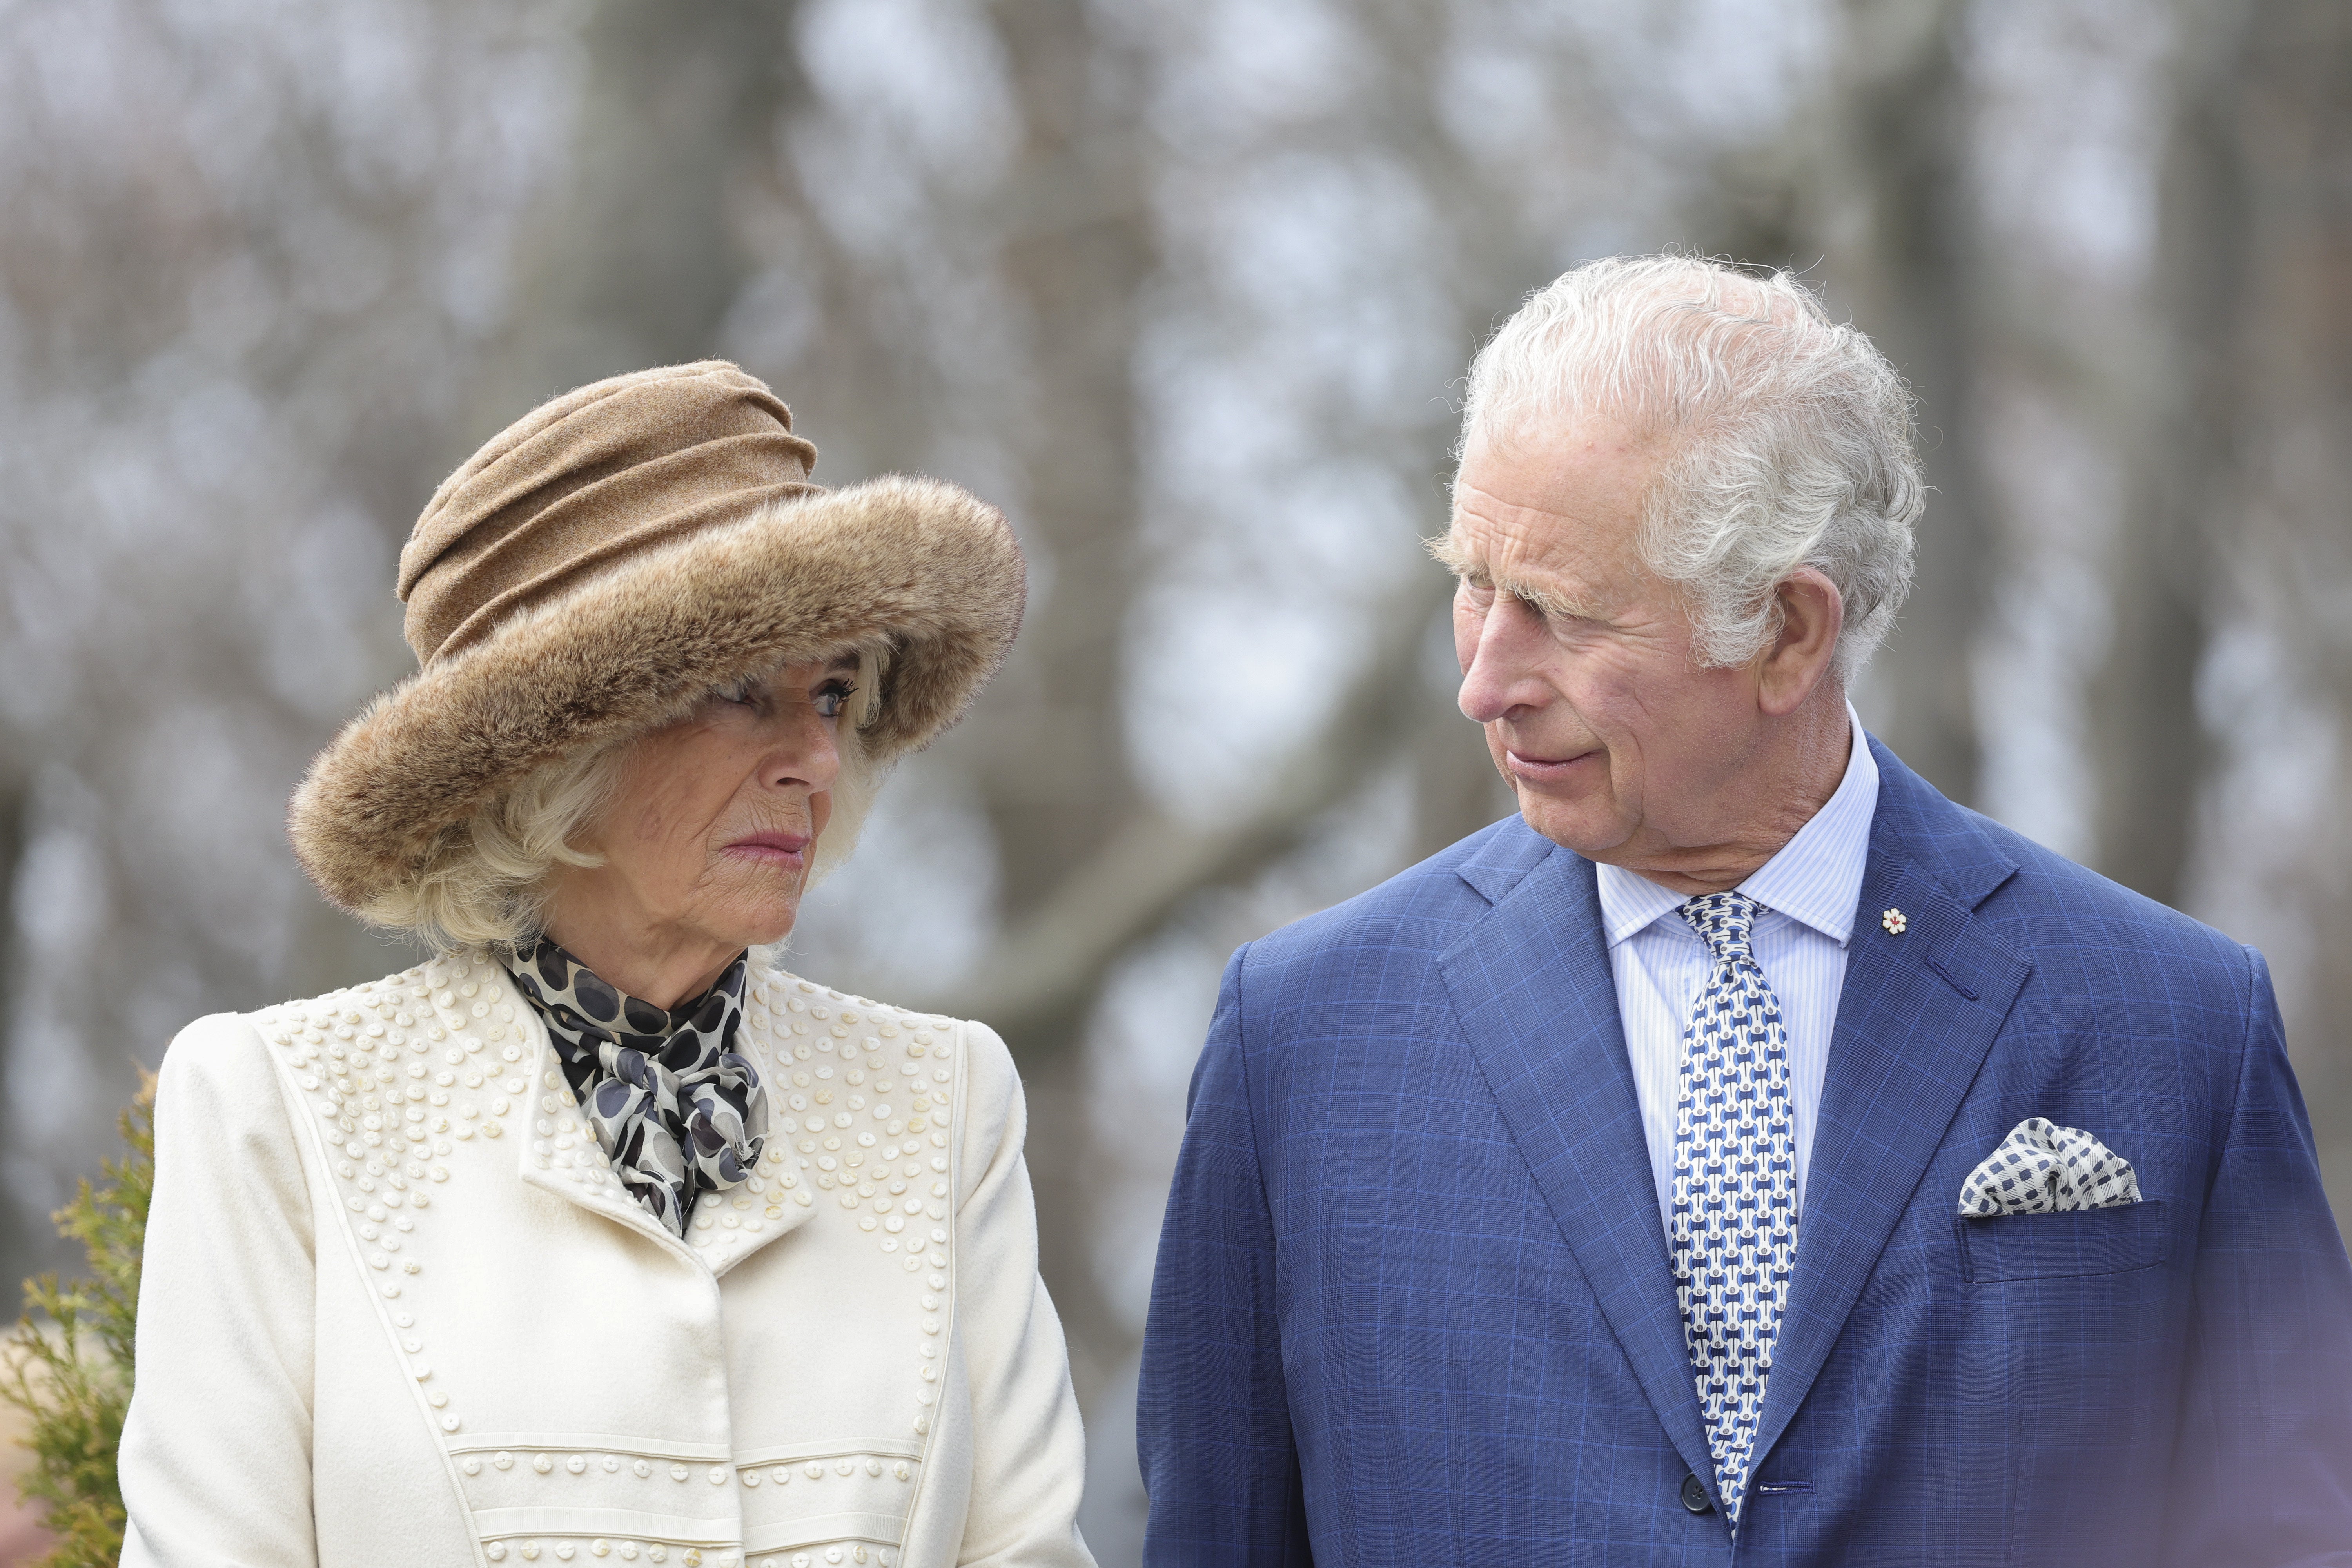 Camilla and Charles are coming to the end of a three-day tour of Canada